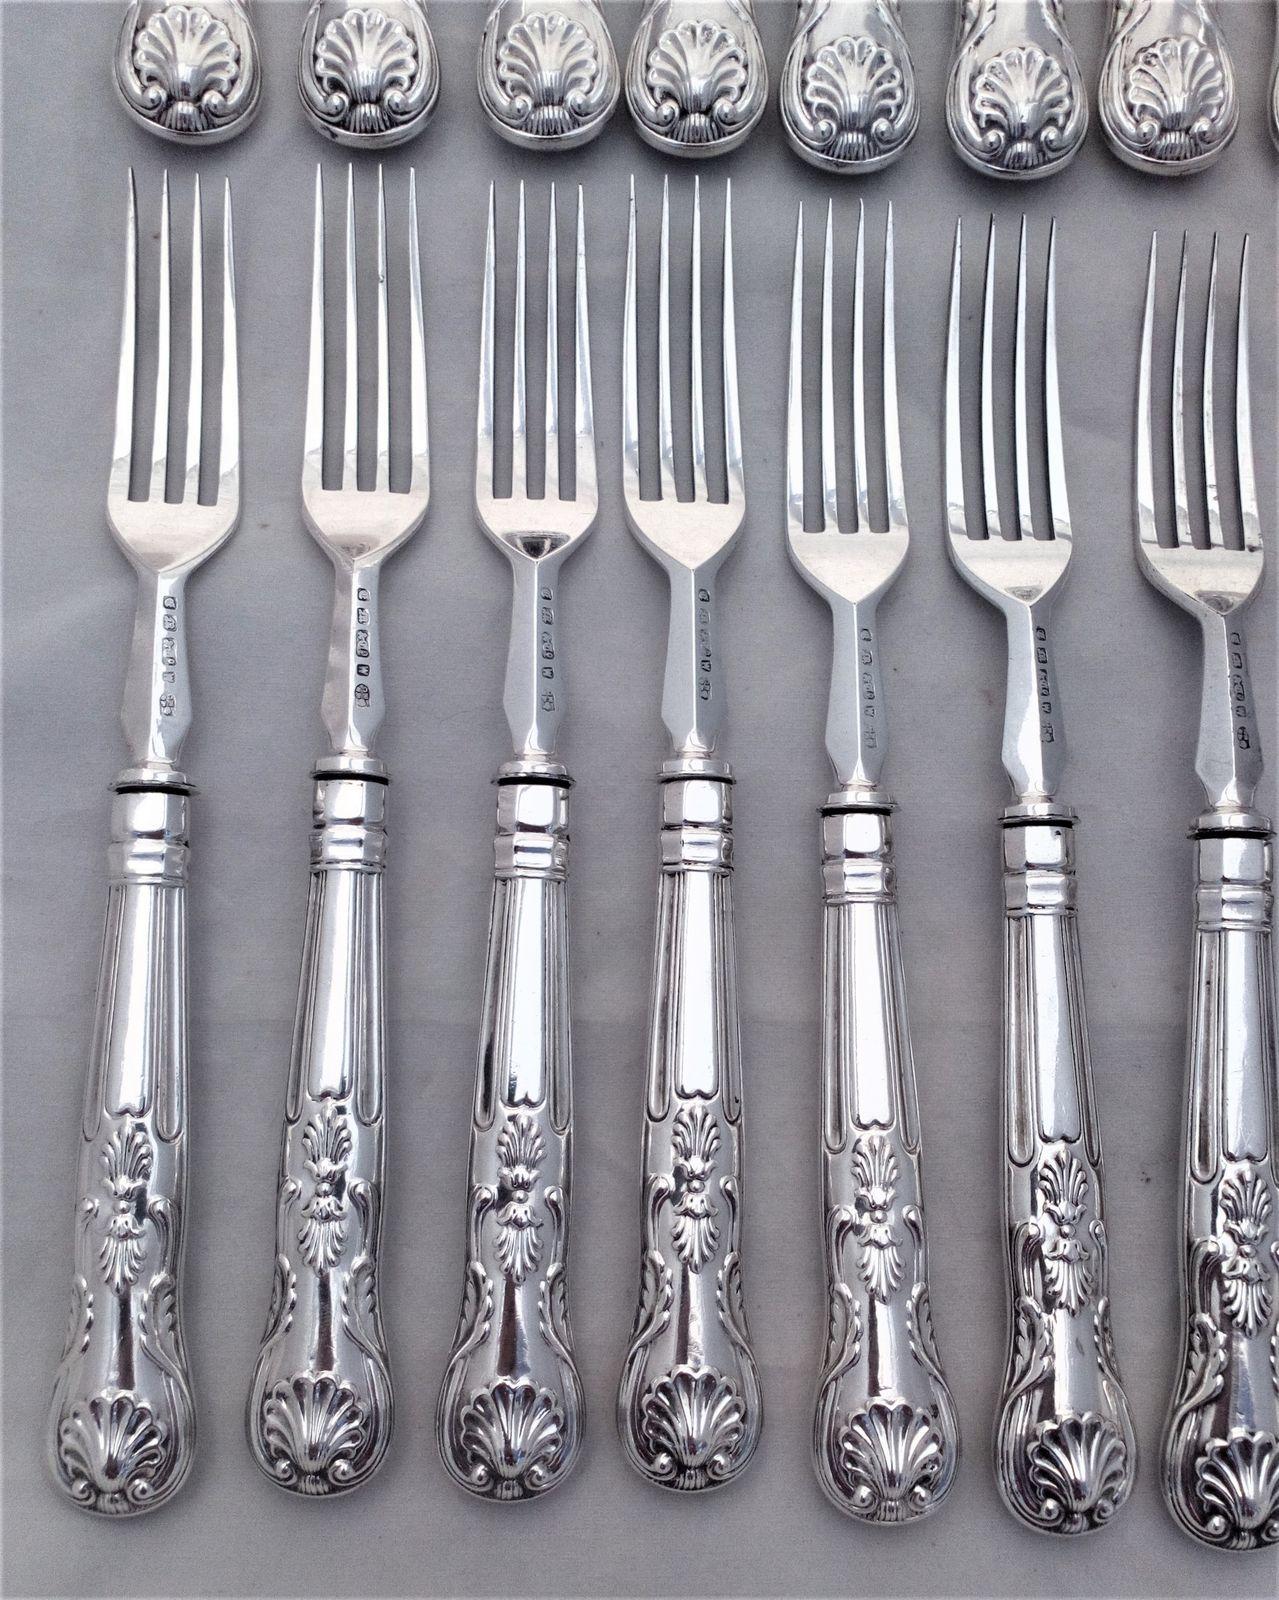 An antique set of twelve place setting of Elkington silver plated cutlery with Kings pattern handles. The round nosed bladed knives and the four pronged forks are each marked with the Elkington and Co marks and the date code W for 1882.